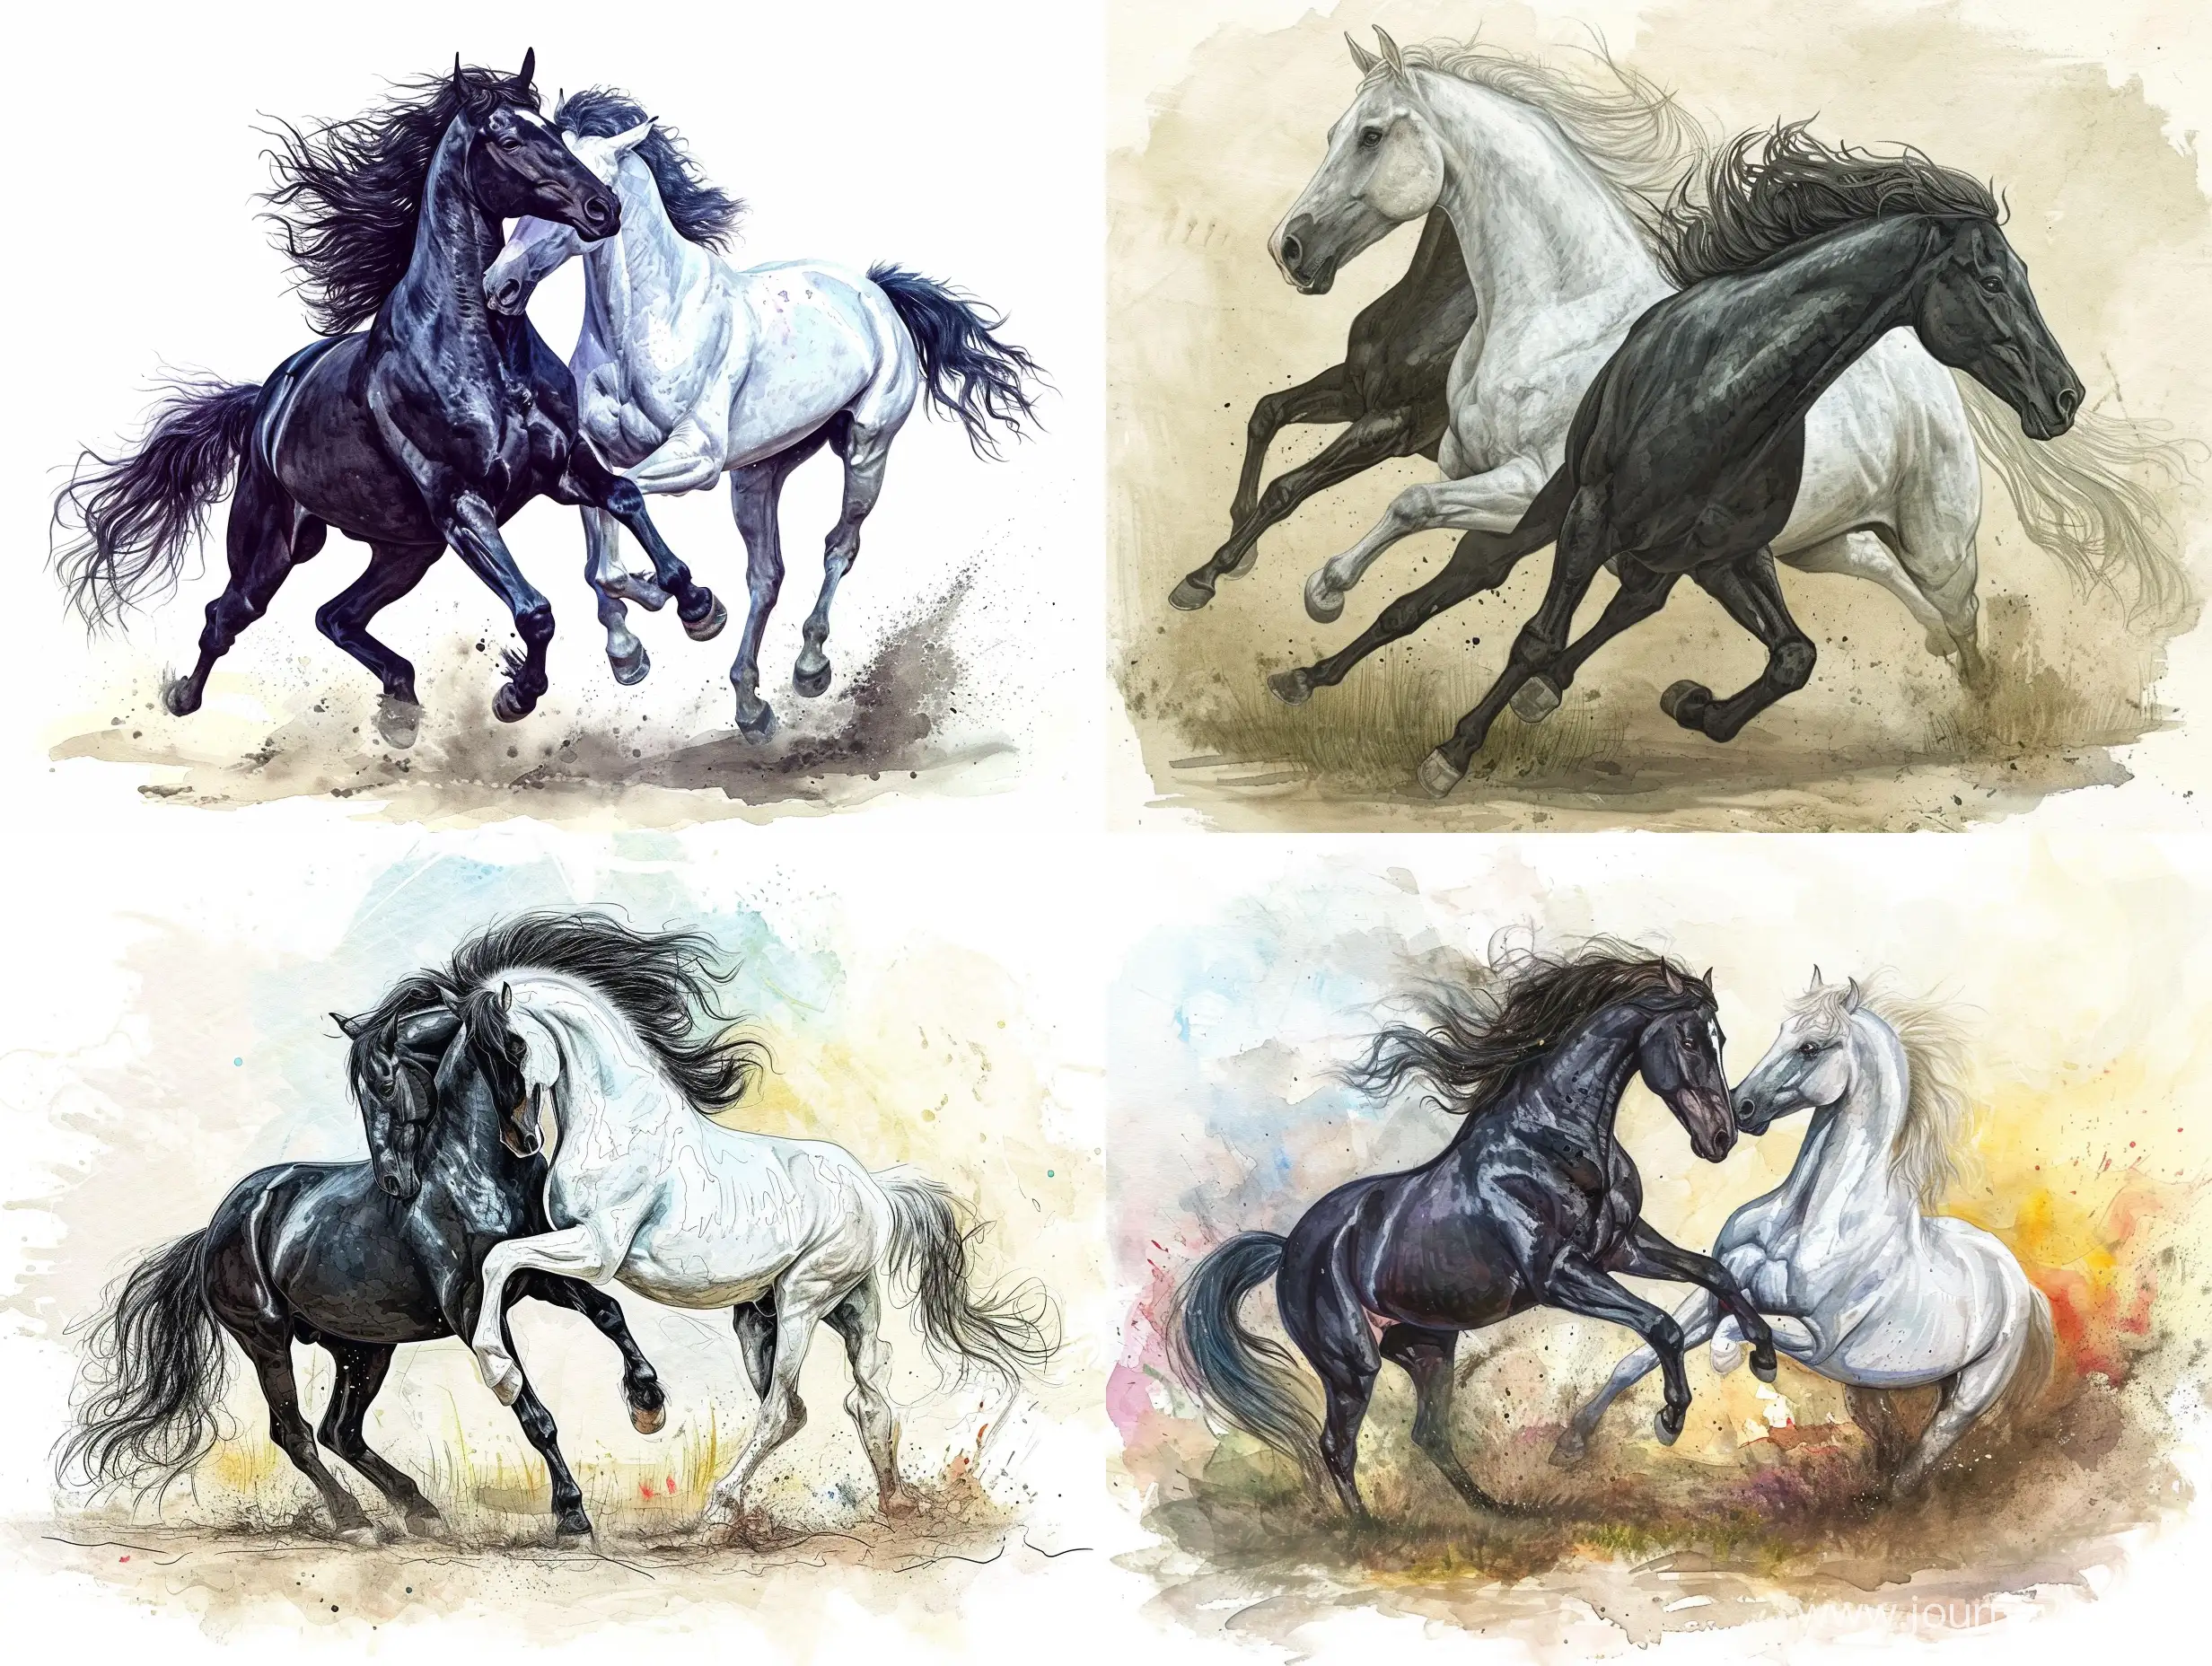 Epic-Battle-of-Black-and-White-Horses-Beautiful-Watercolor-Illustration